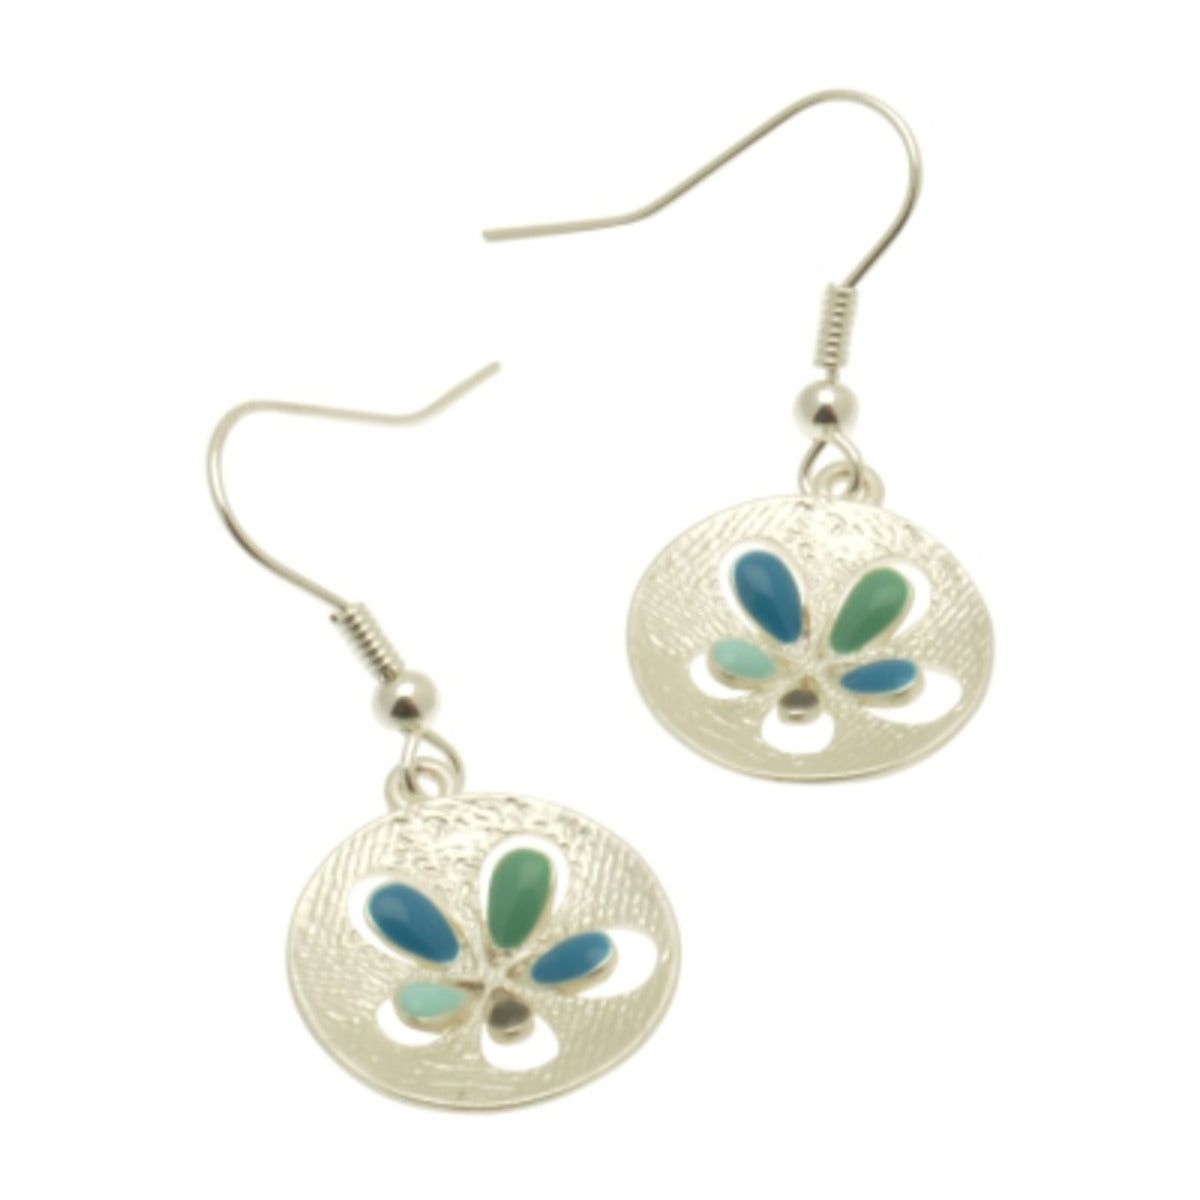 Make a statement with these stunning Aqua Popout Earrings! Petals of aqua, teal, mint and grey create intricate detail that stands out against a matt silver disc. Add a subtle pop of color that will elevate any look.  They measure approx 1.6cm in diameter and hang from fishhooks.